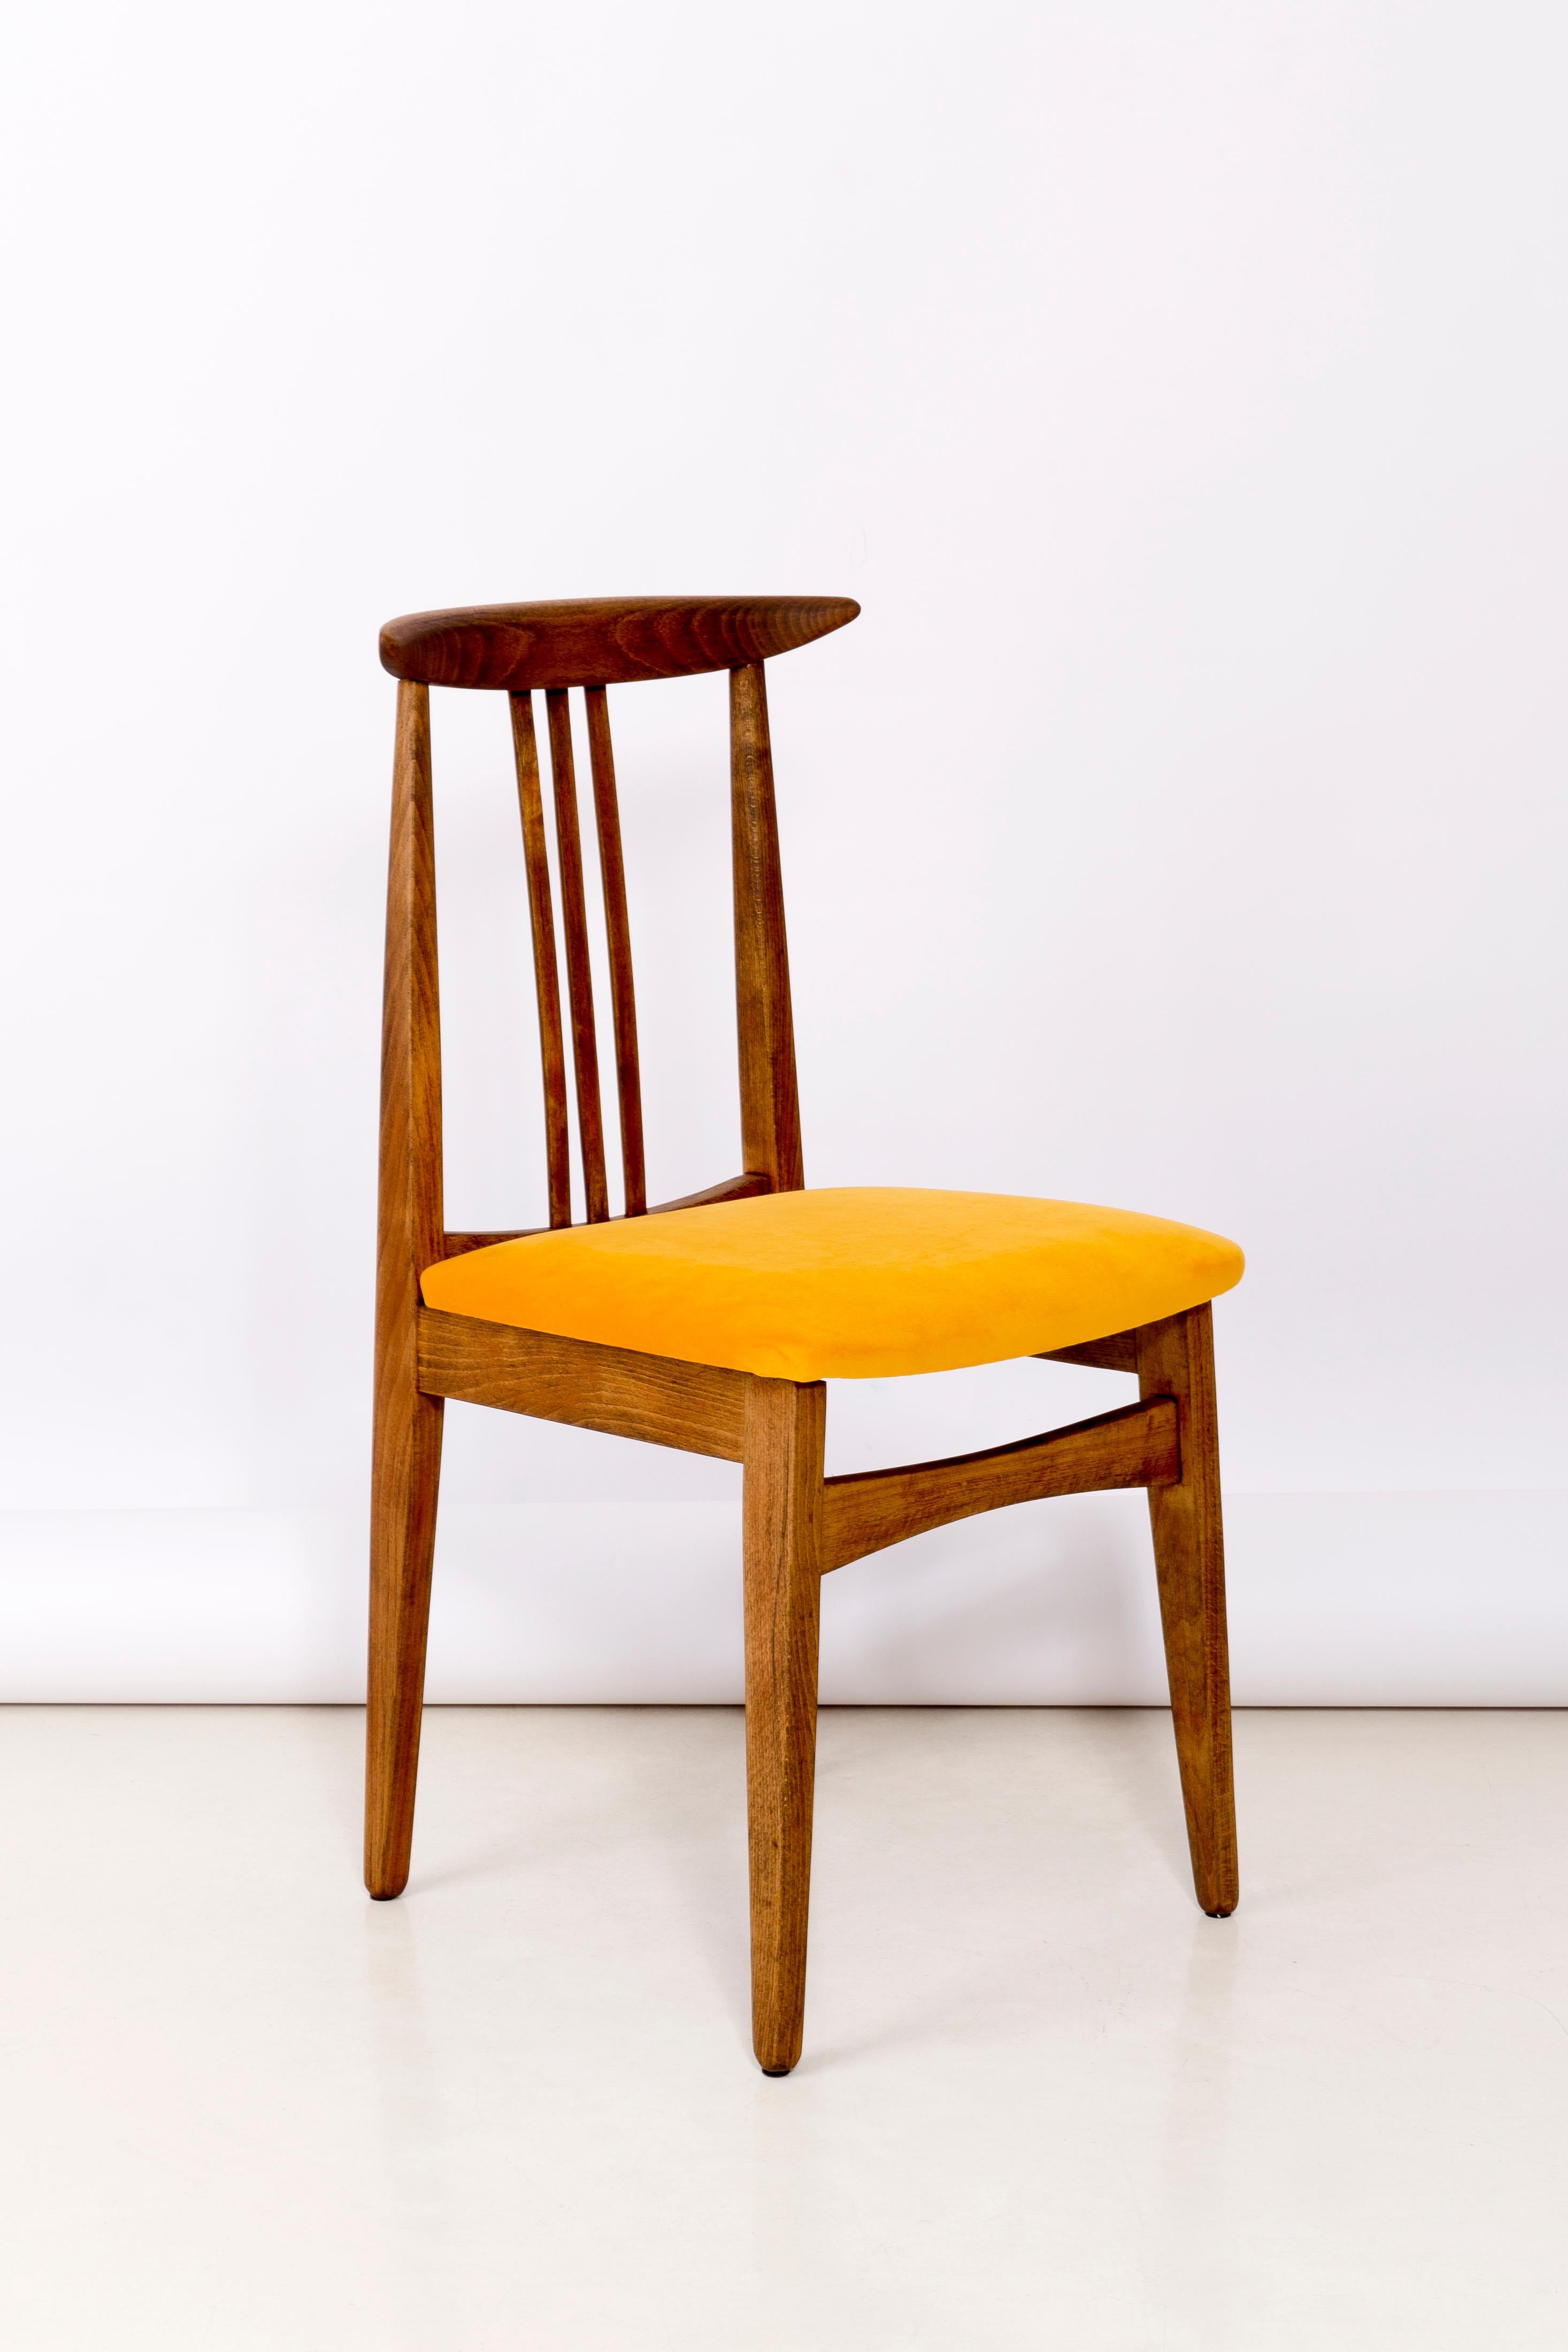 Polish Set of Two Yellow Chairs, by Zielinski, Poland, 1960s For Sale